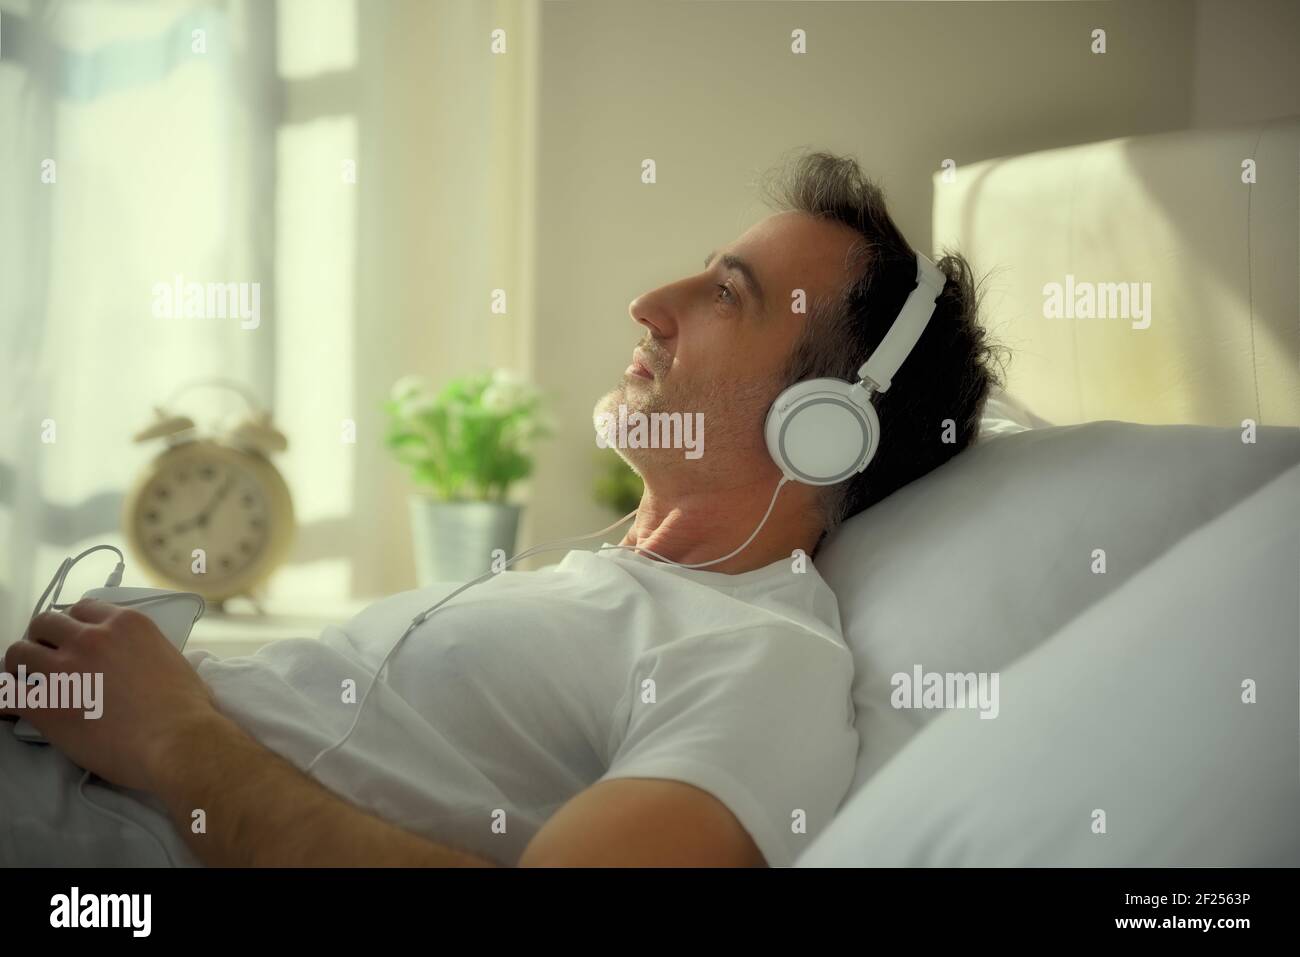 Melancholic adult man with lost eyes listening to music with white headphones from the mobile lying on the bed entering sunset light Stock Photo